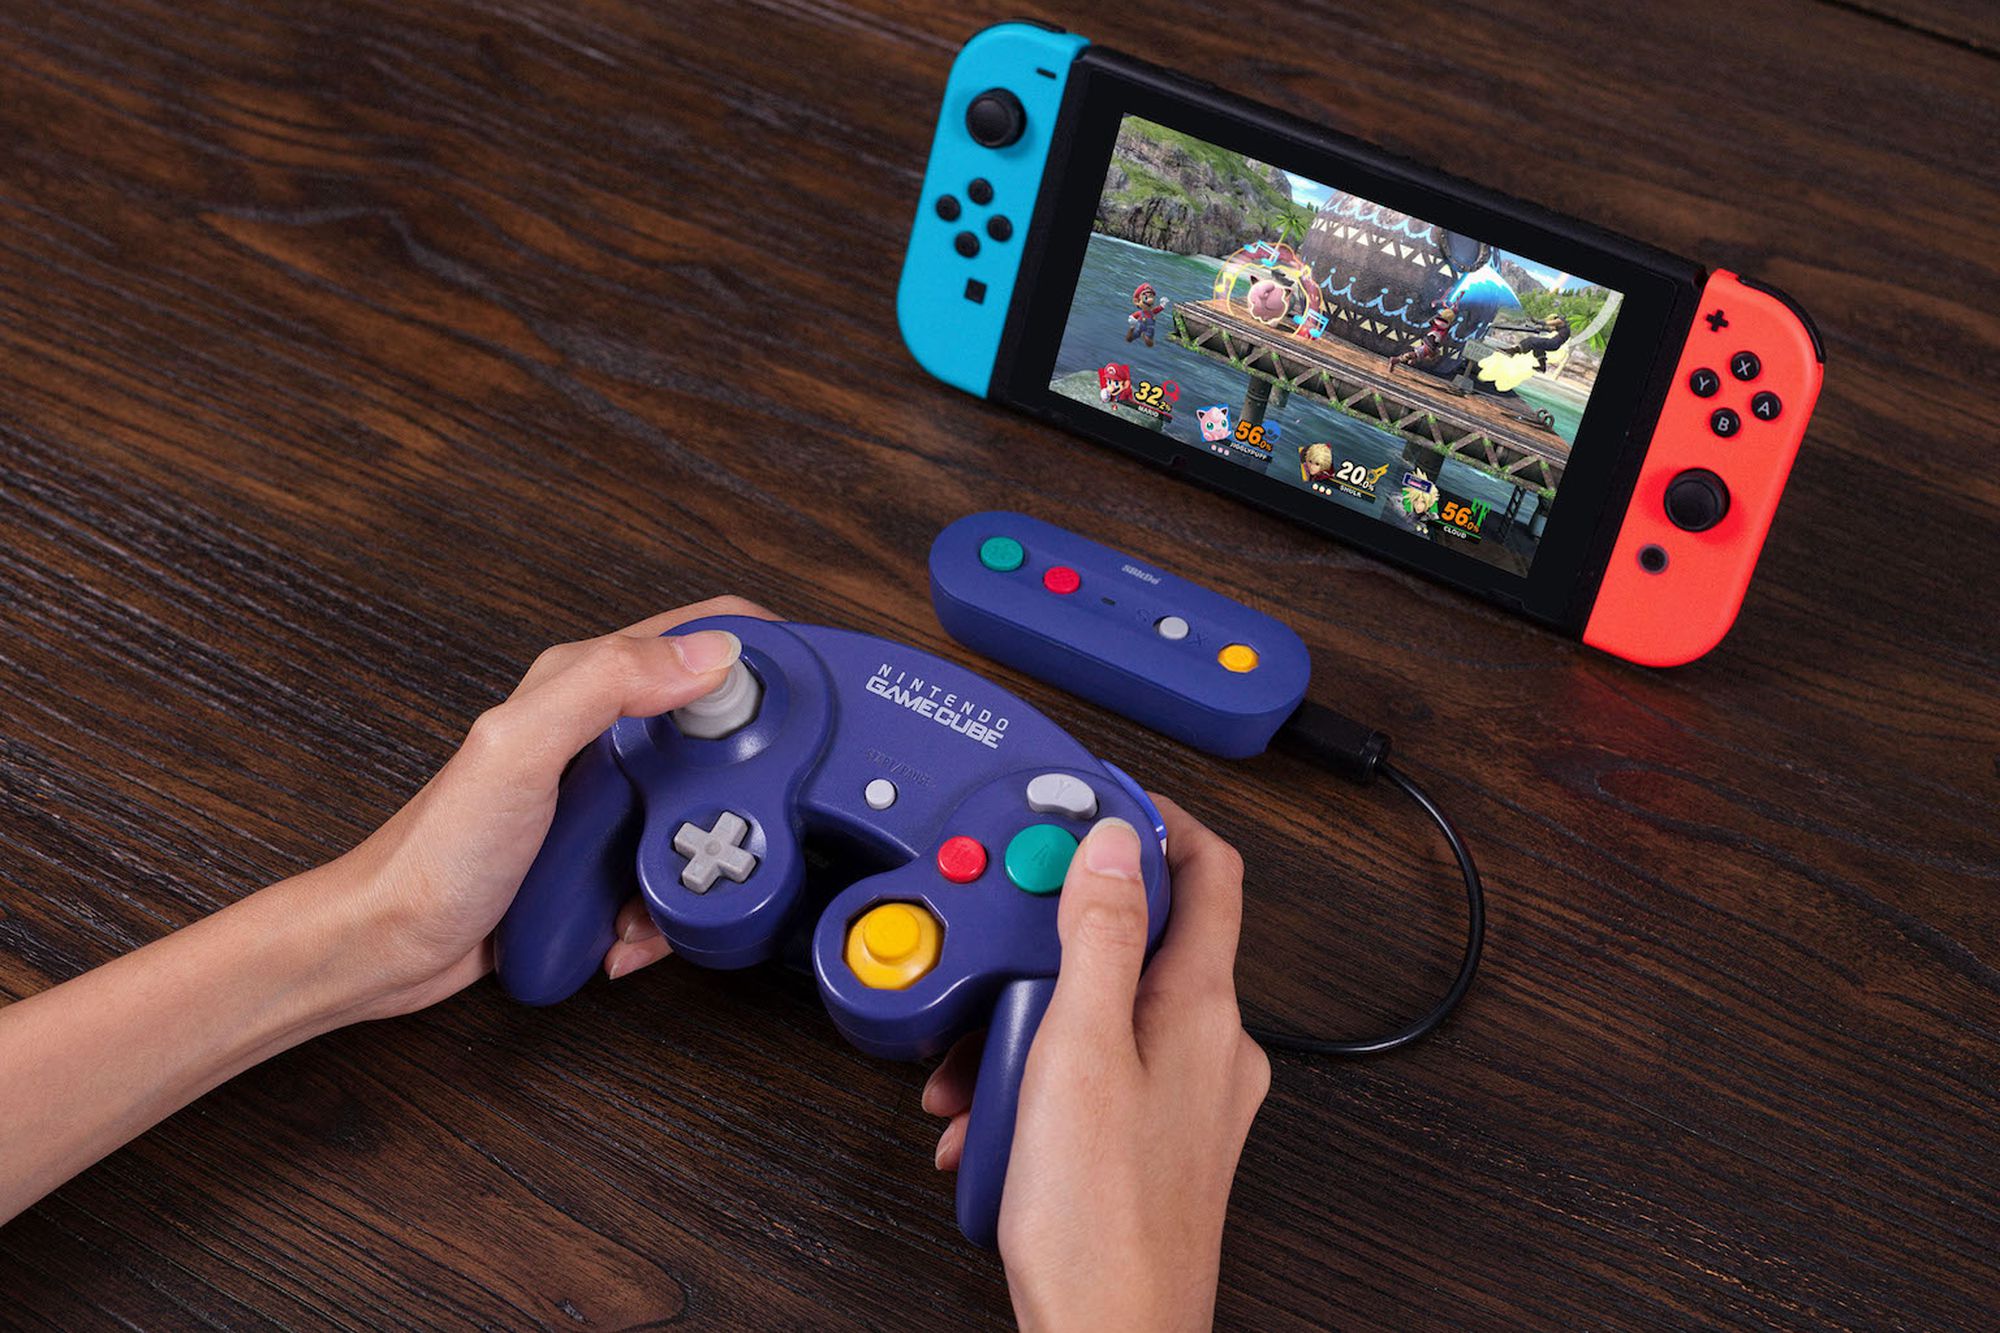 8BitDo's adapter is the best way to play Smash Bros. Ultimate